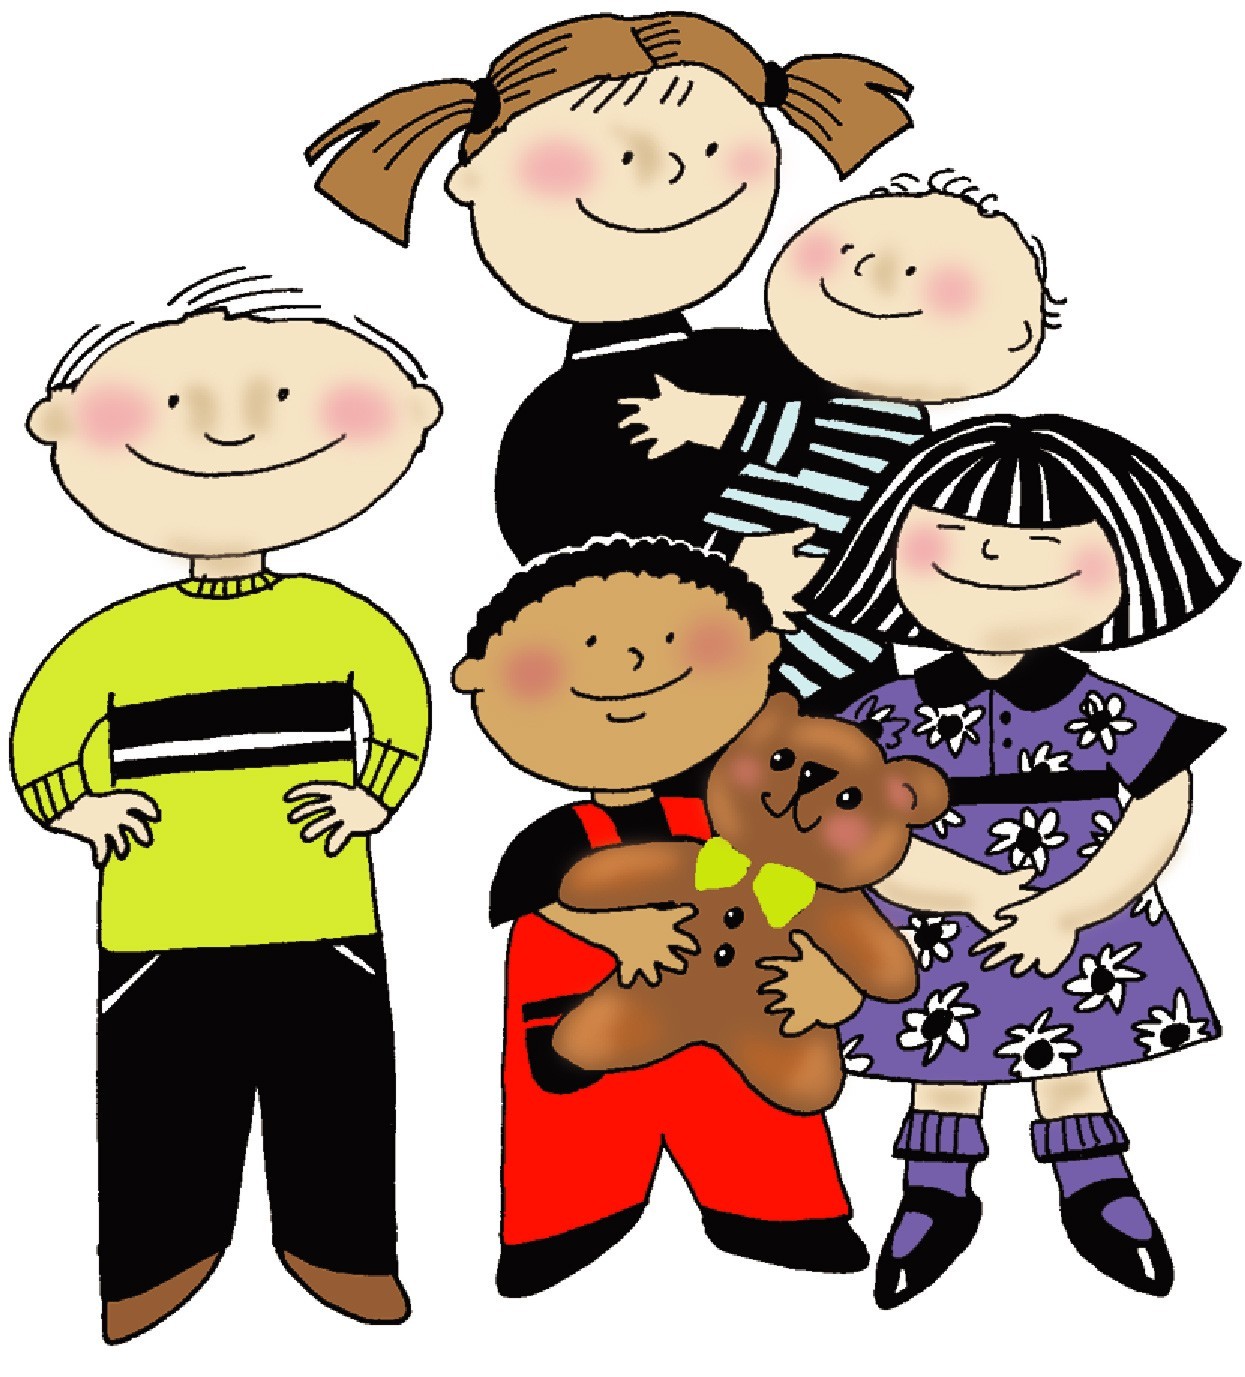 Free Childcare Clipart - ClipArt Best